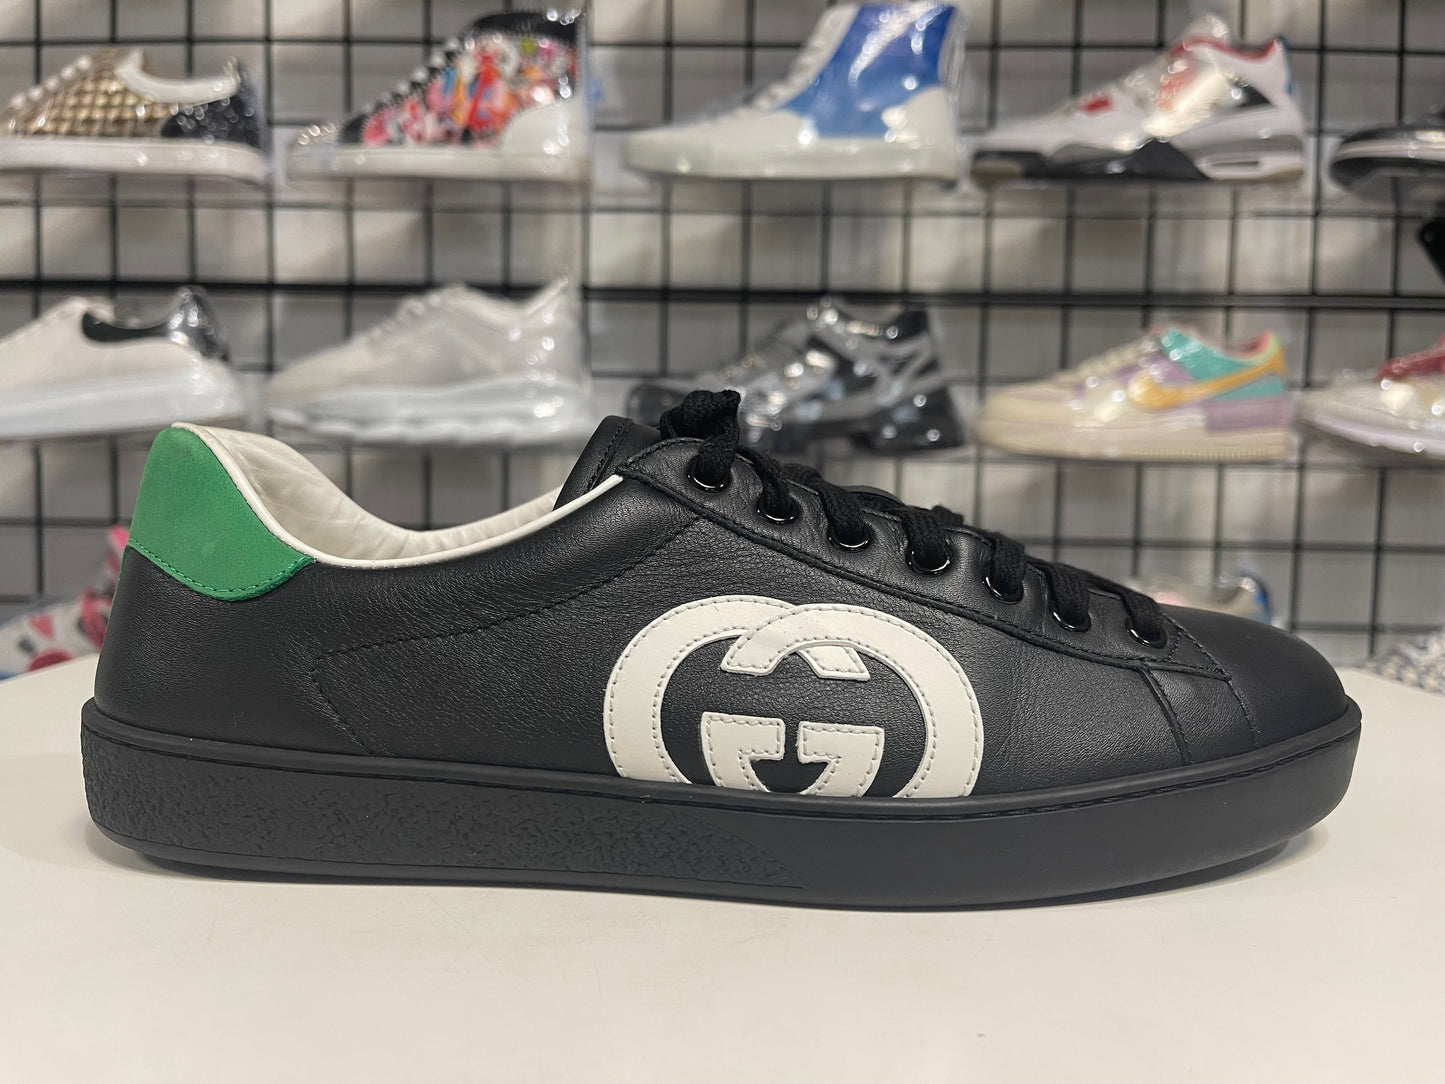 Gucci Ace Embroidered Sneaker size 7.5G